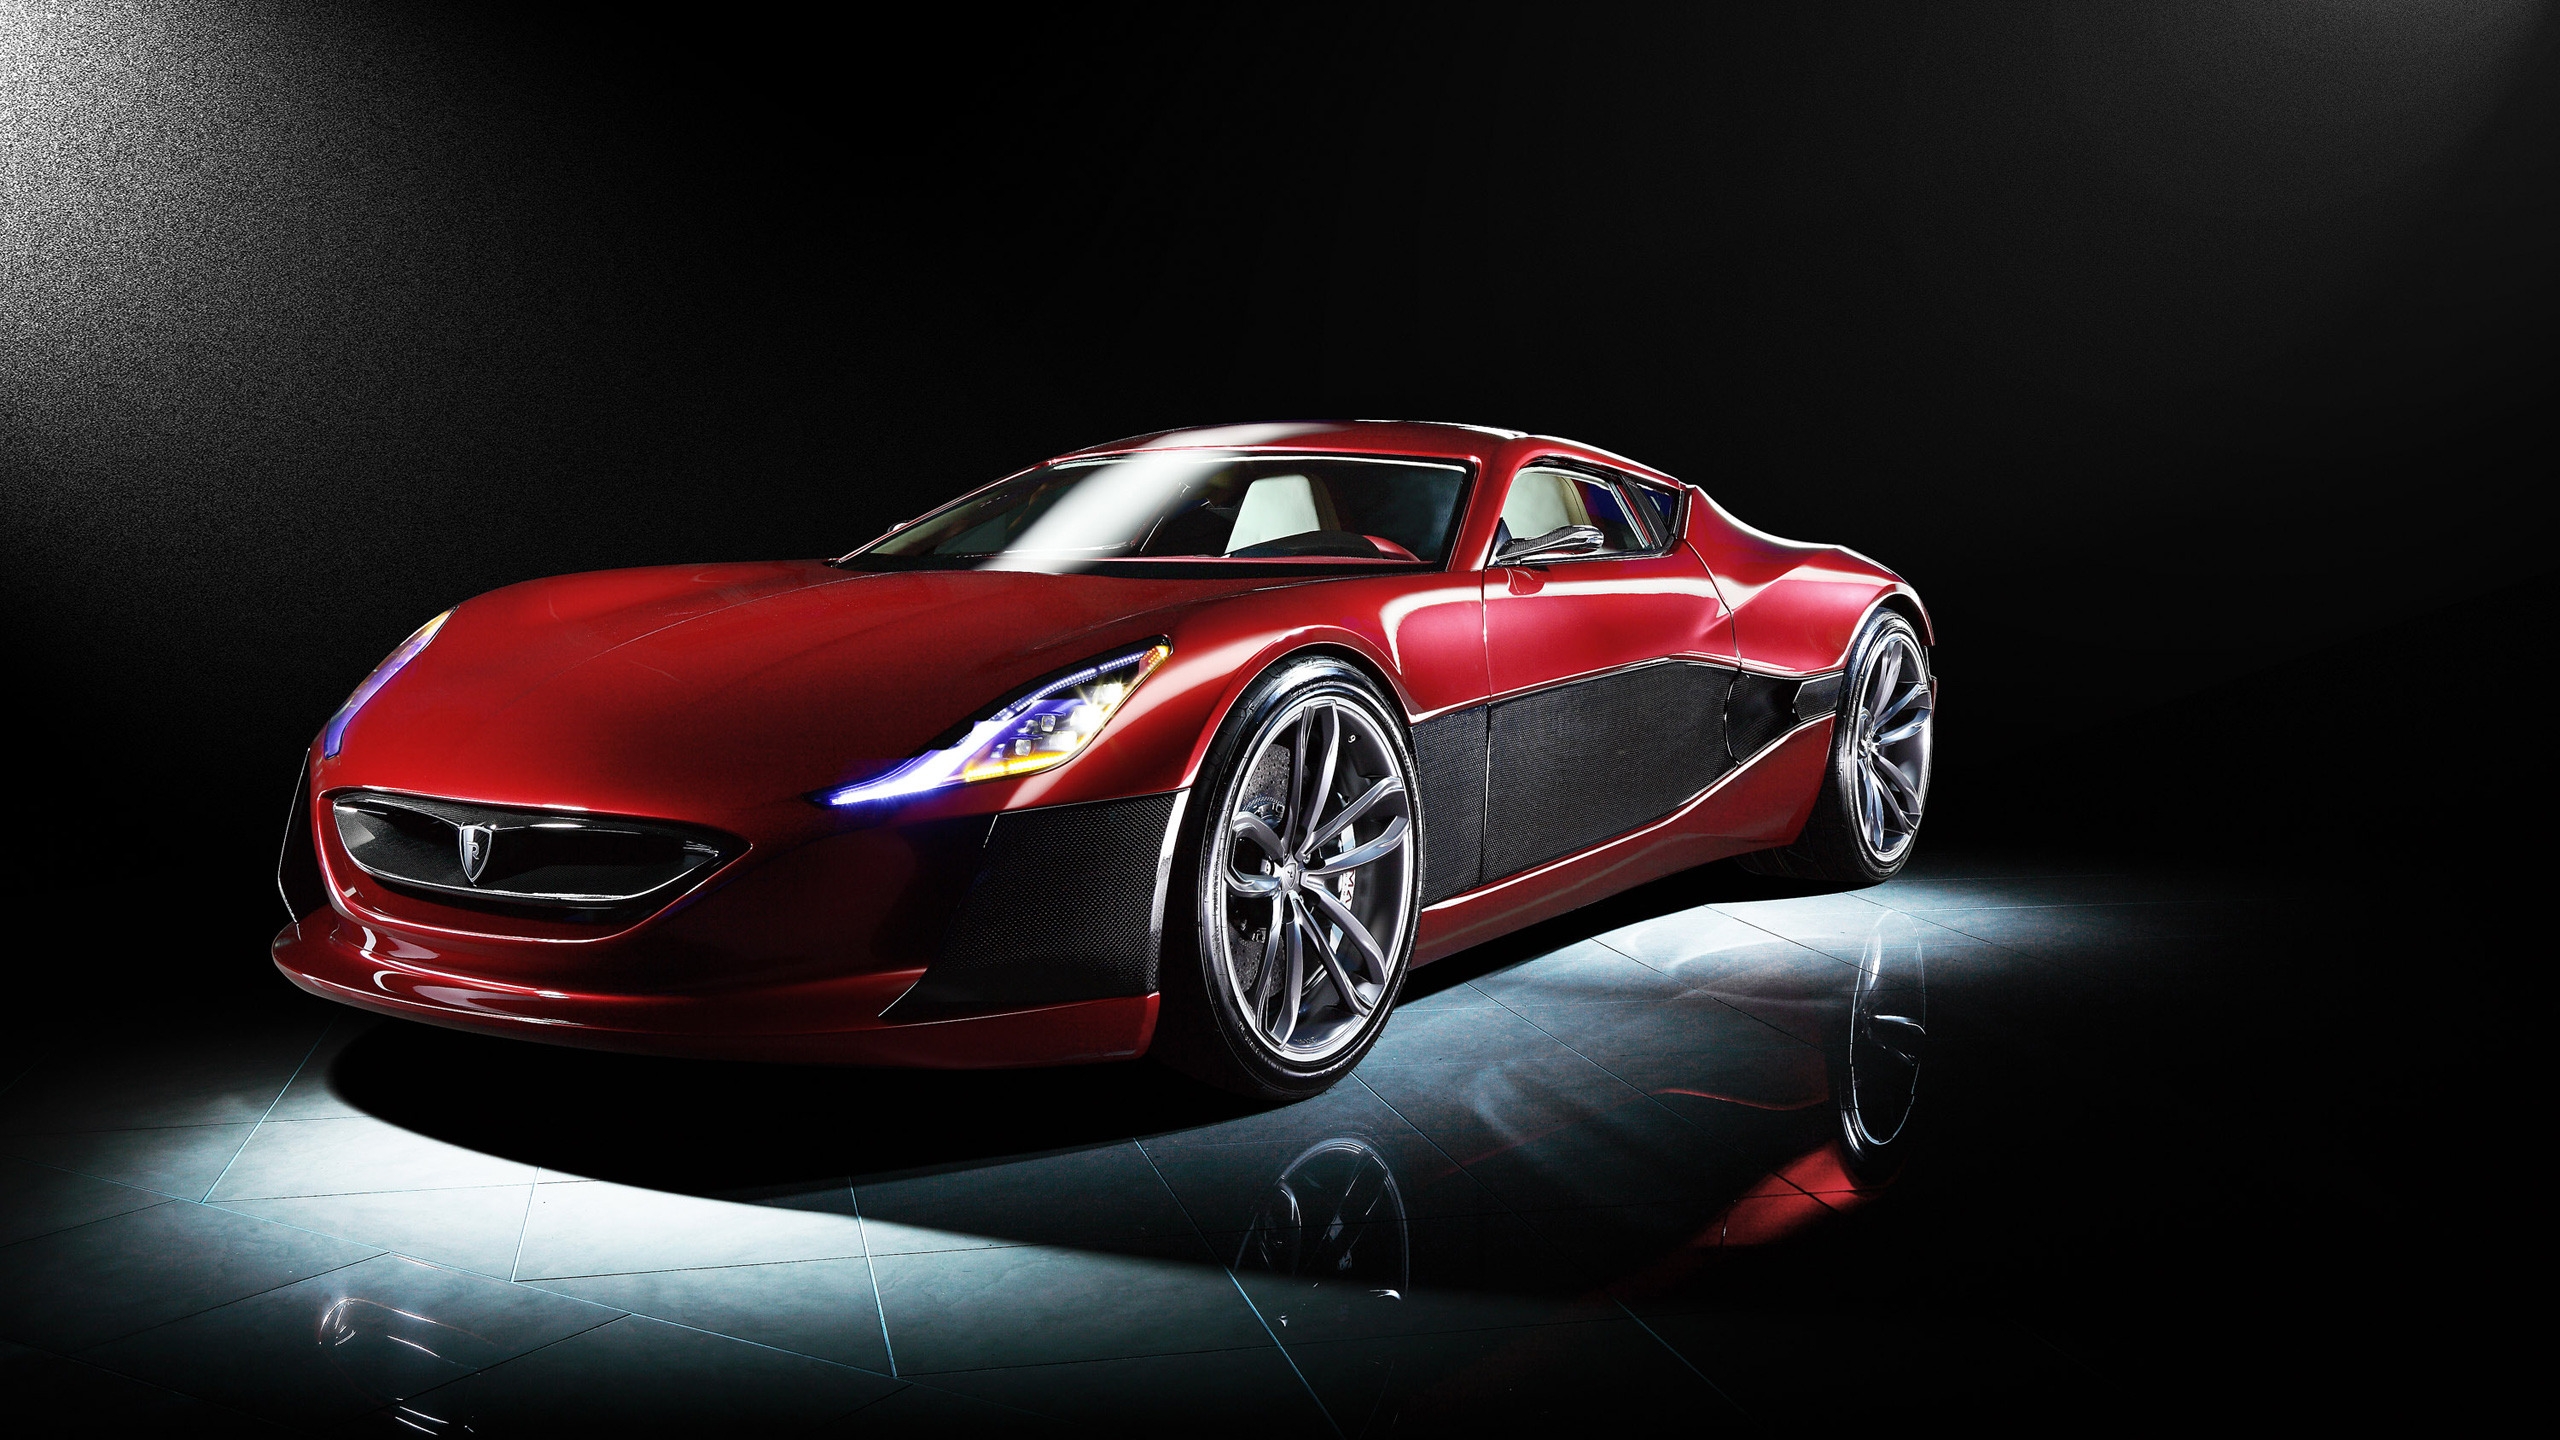 Rimac Concept One for 2560x1440 HDTV resolution